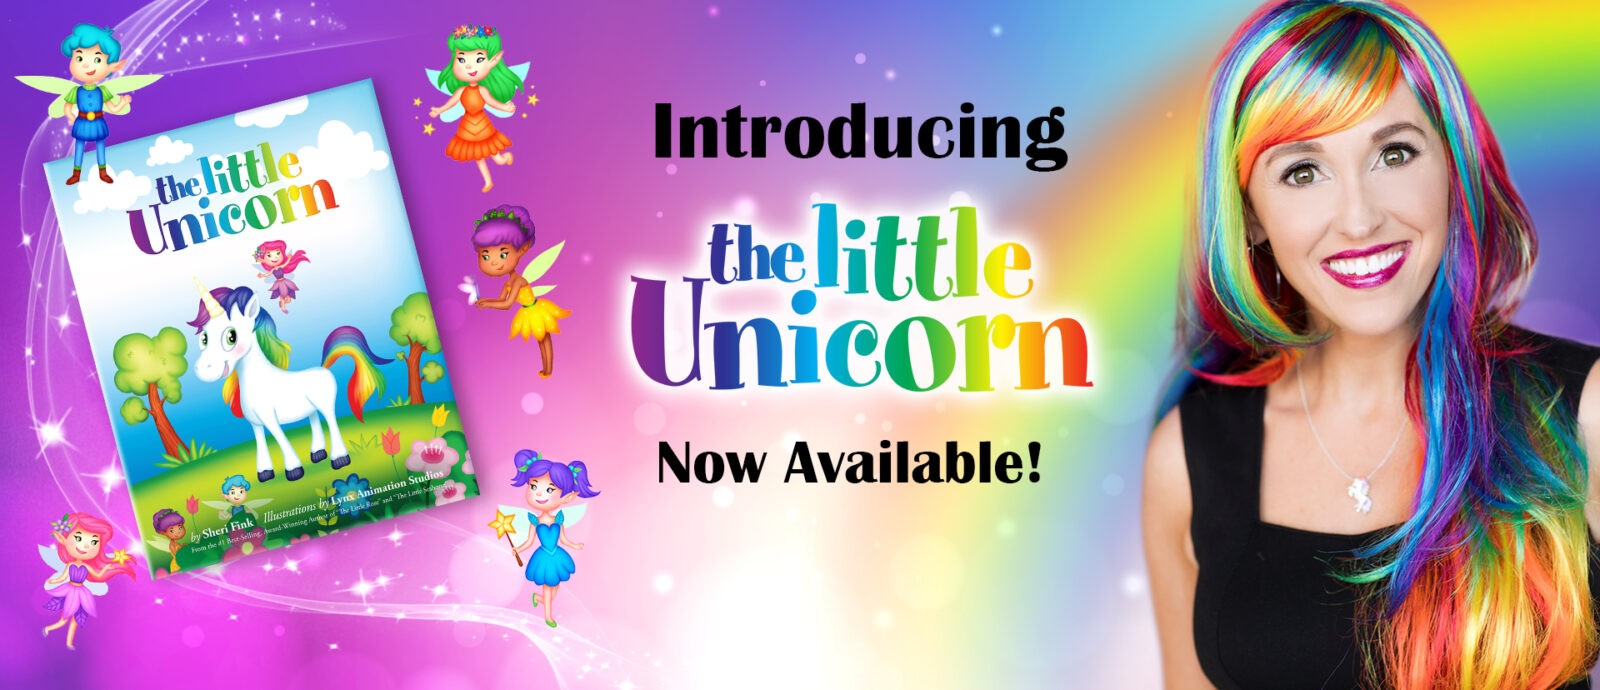 The Little Unicorn book by Sheri Fink is now available